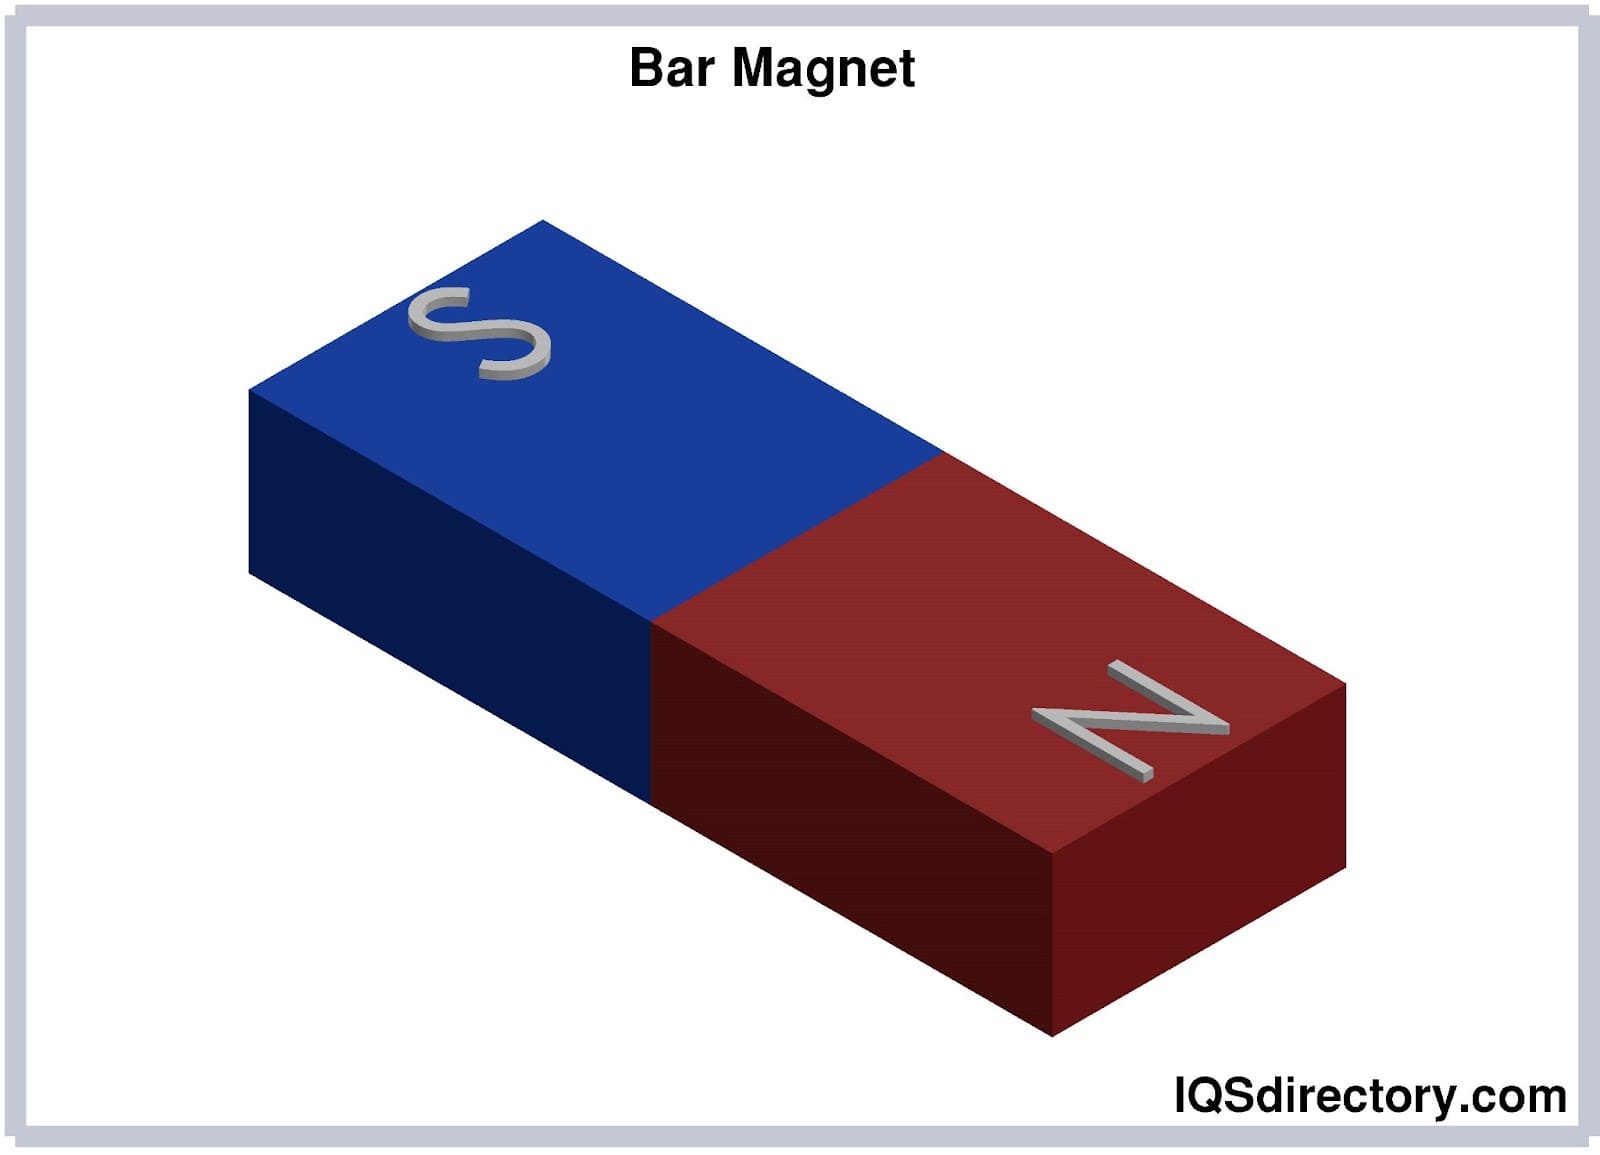 Magnets: Types, Applications, Manufacturing, and Magnetizing Process